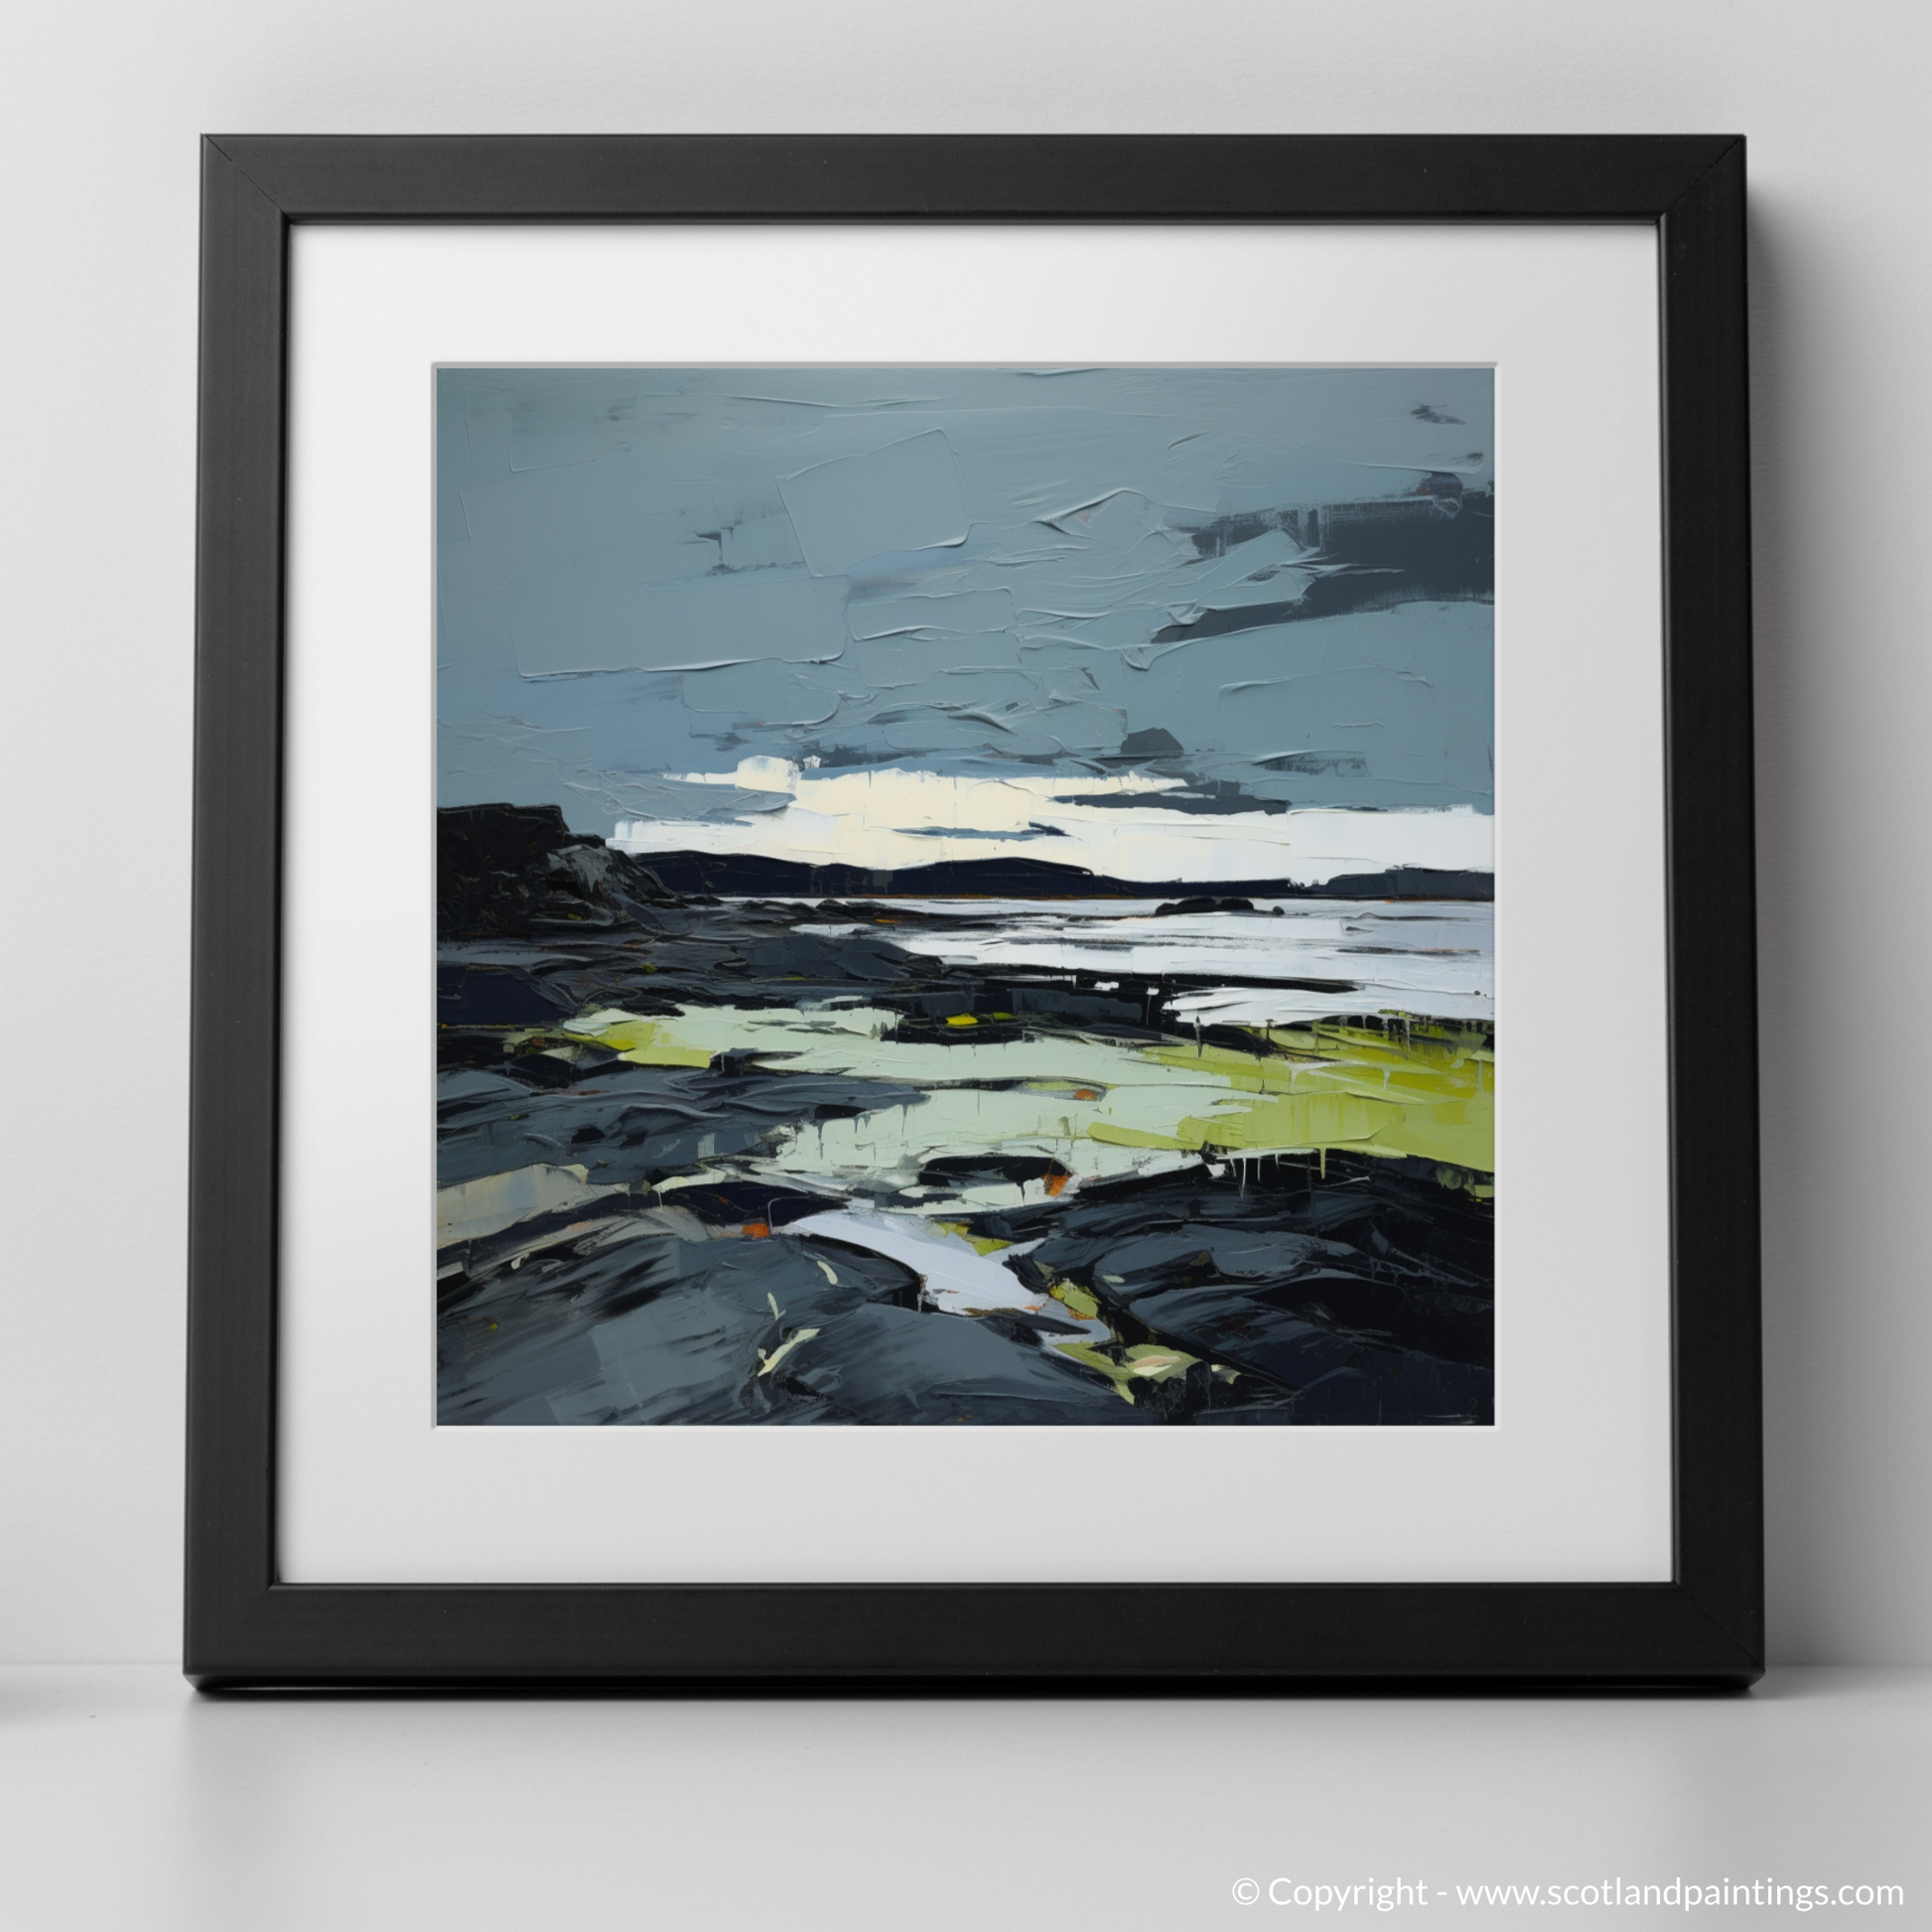 Art Print of Largo Bay, Fife with a black frame